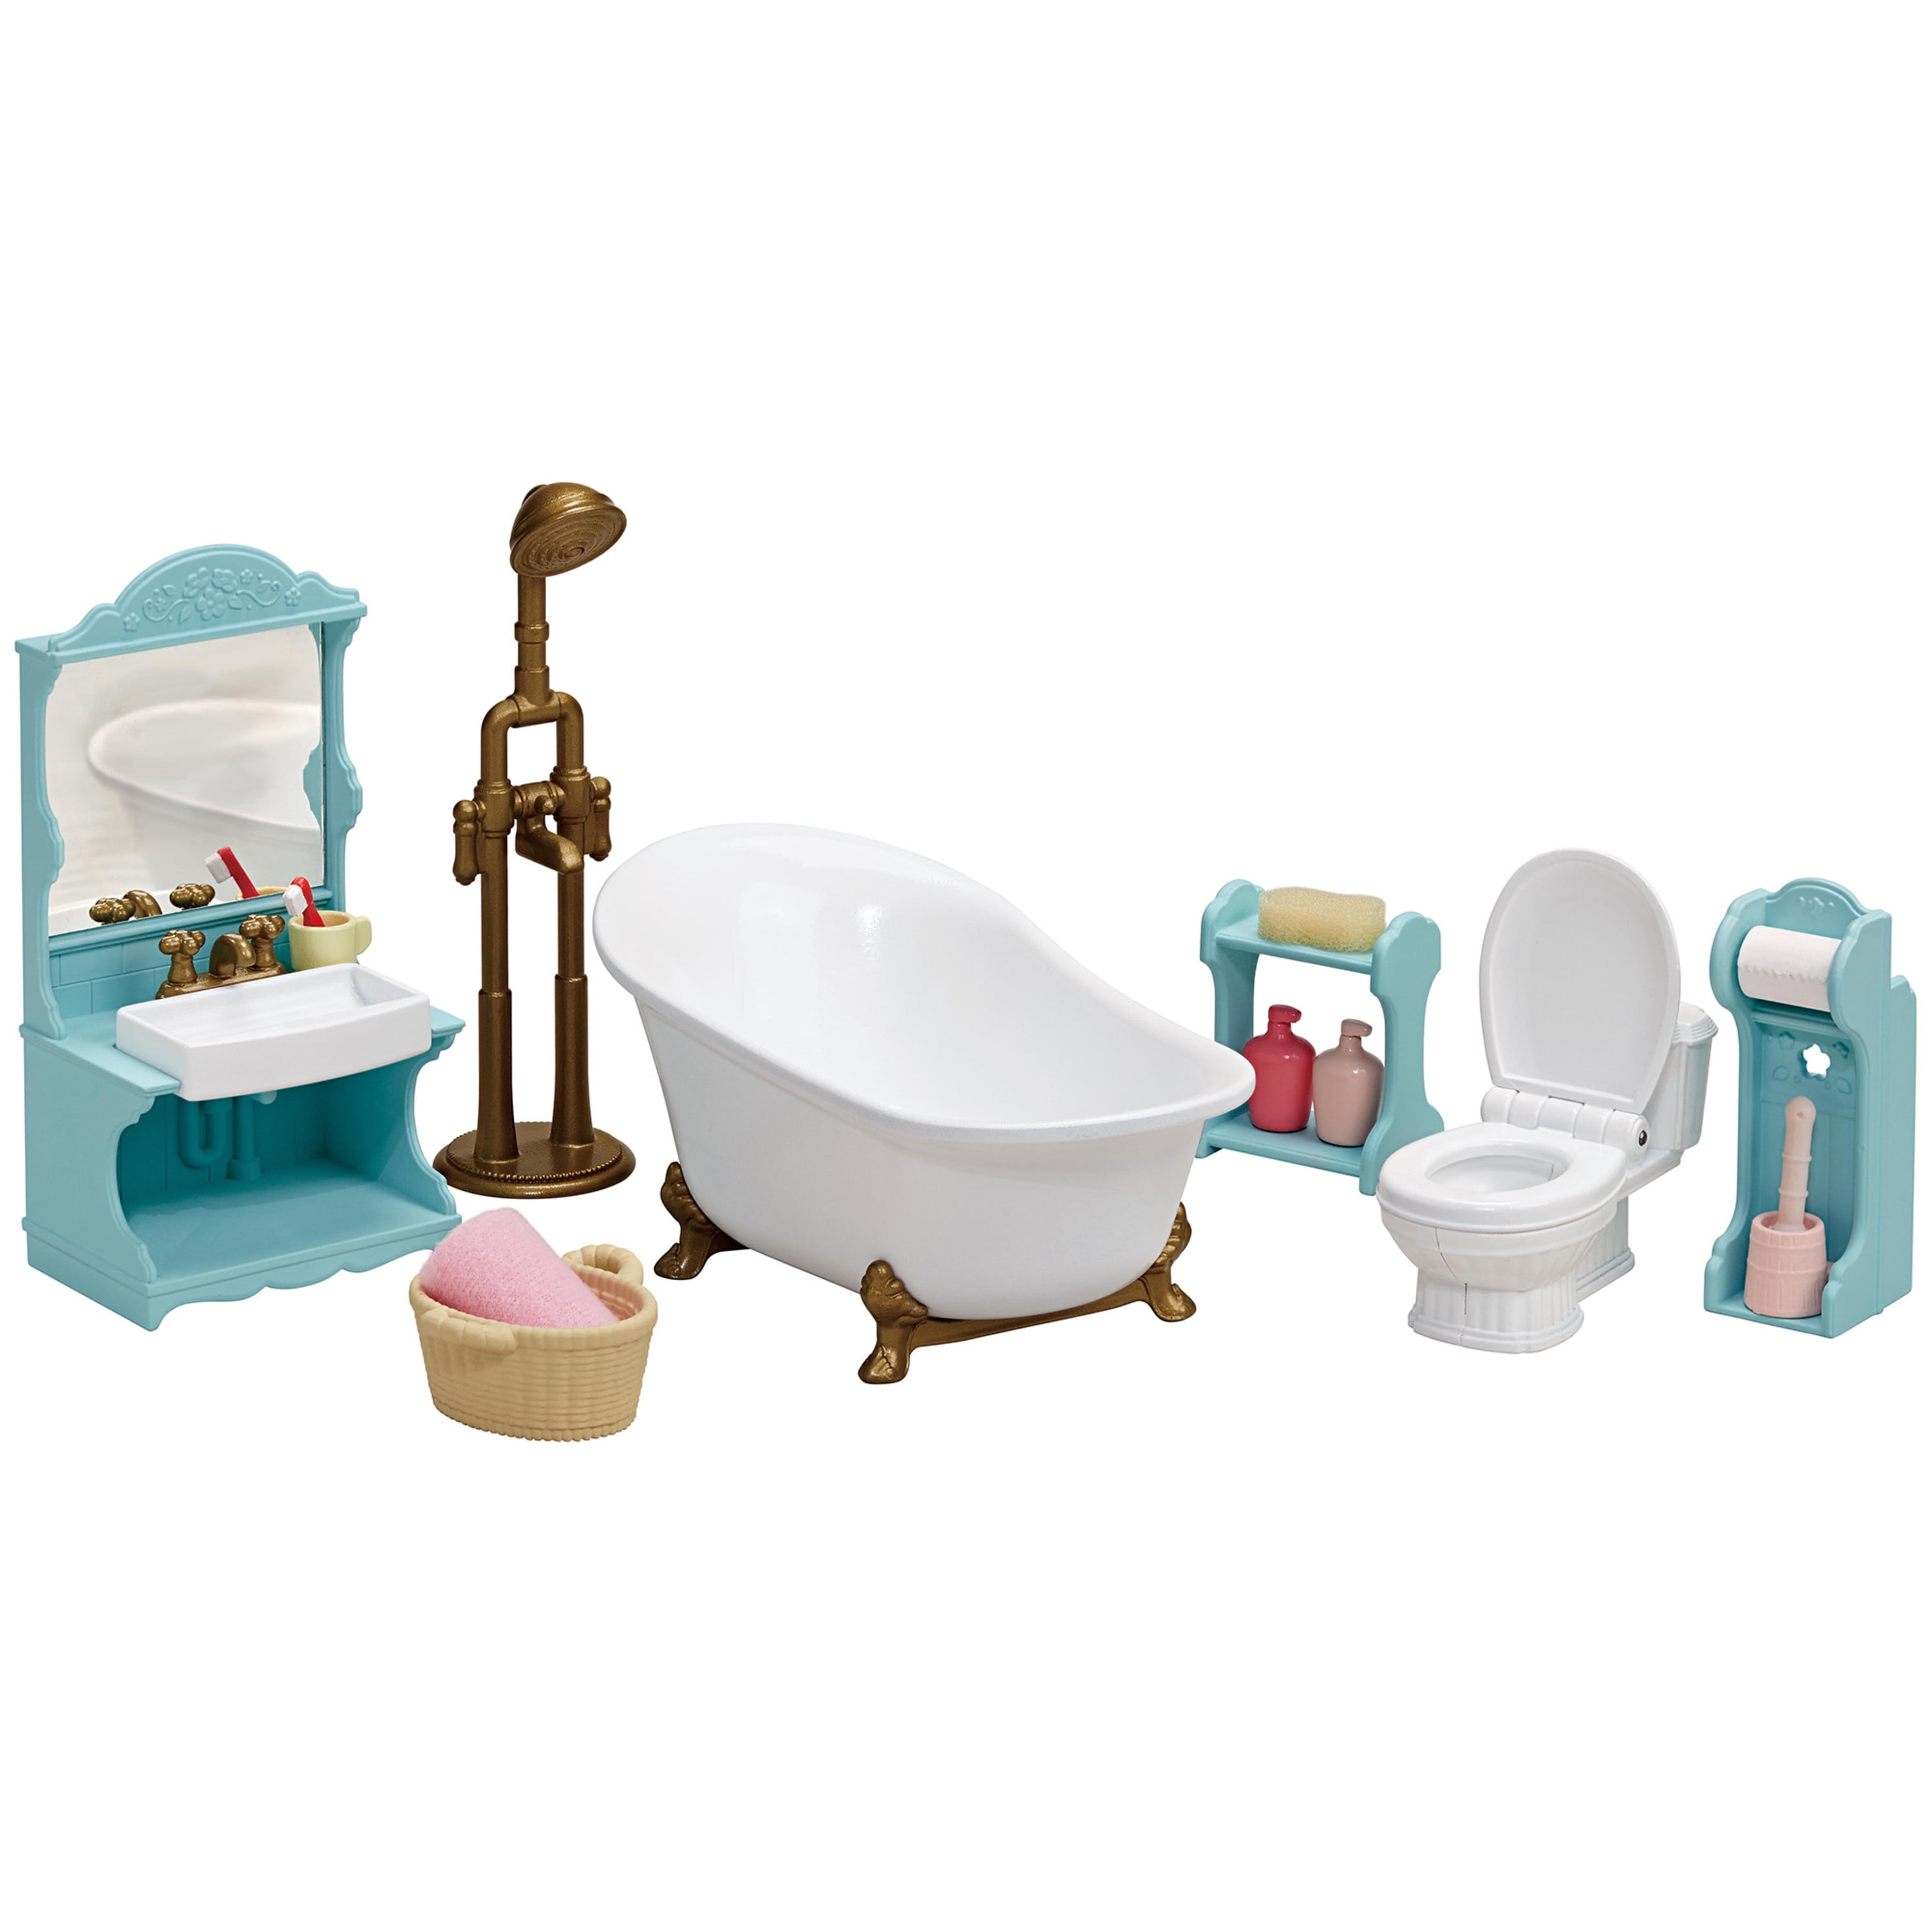 Child Children Toy Gift Toilet and Sink Set Bathroom Furniture for Doll's House 